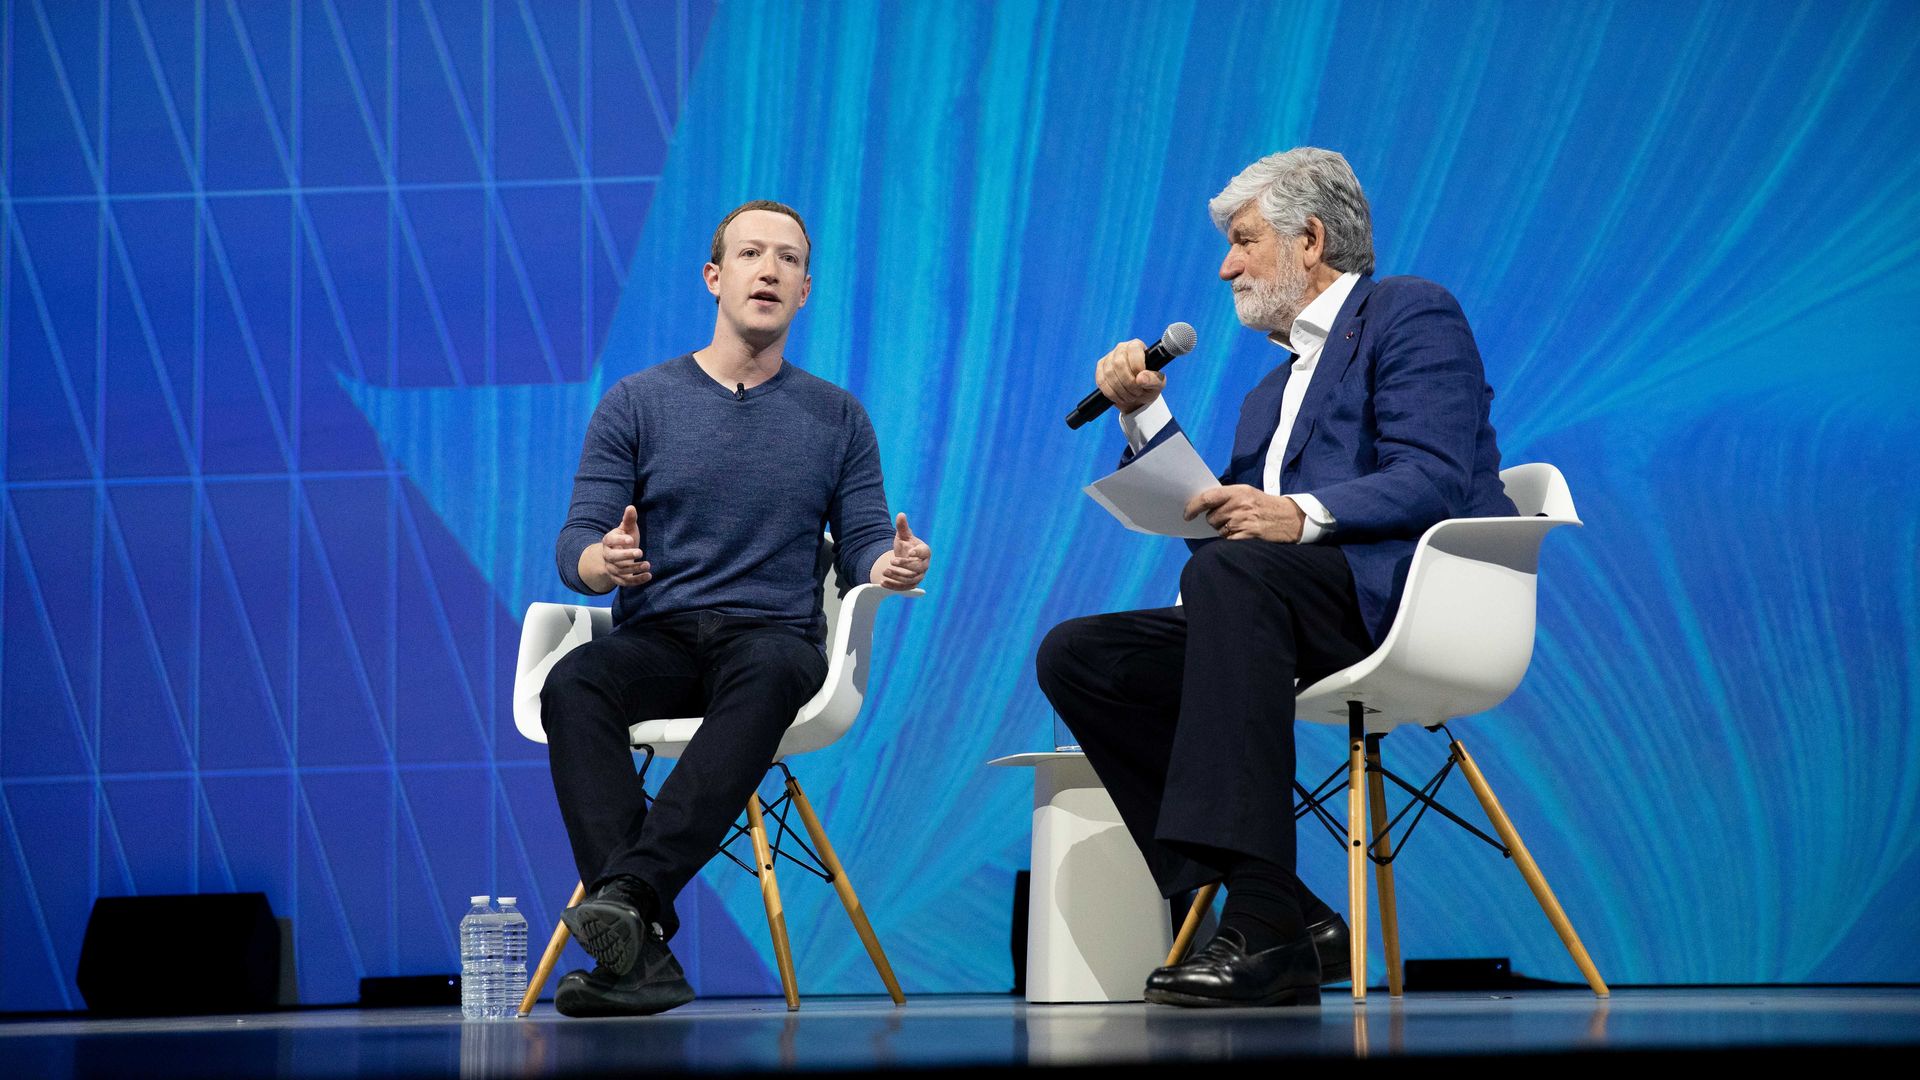 Mark Zuckerberg speaks to another man on stage at a conference